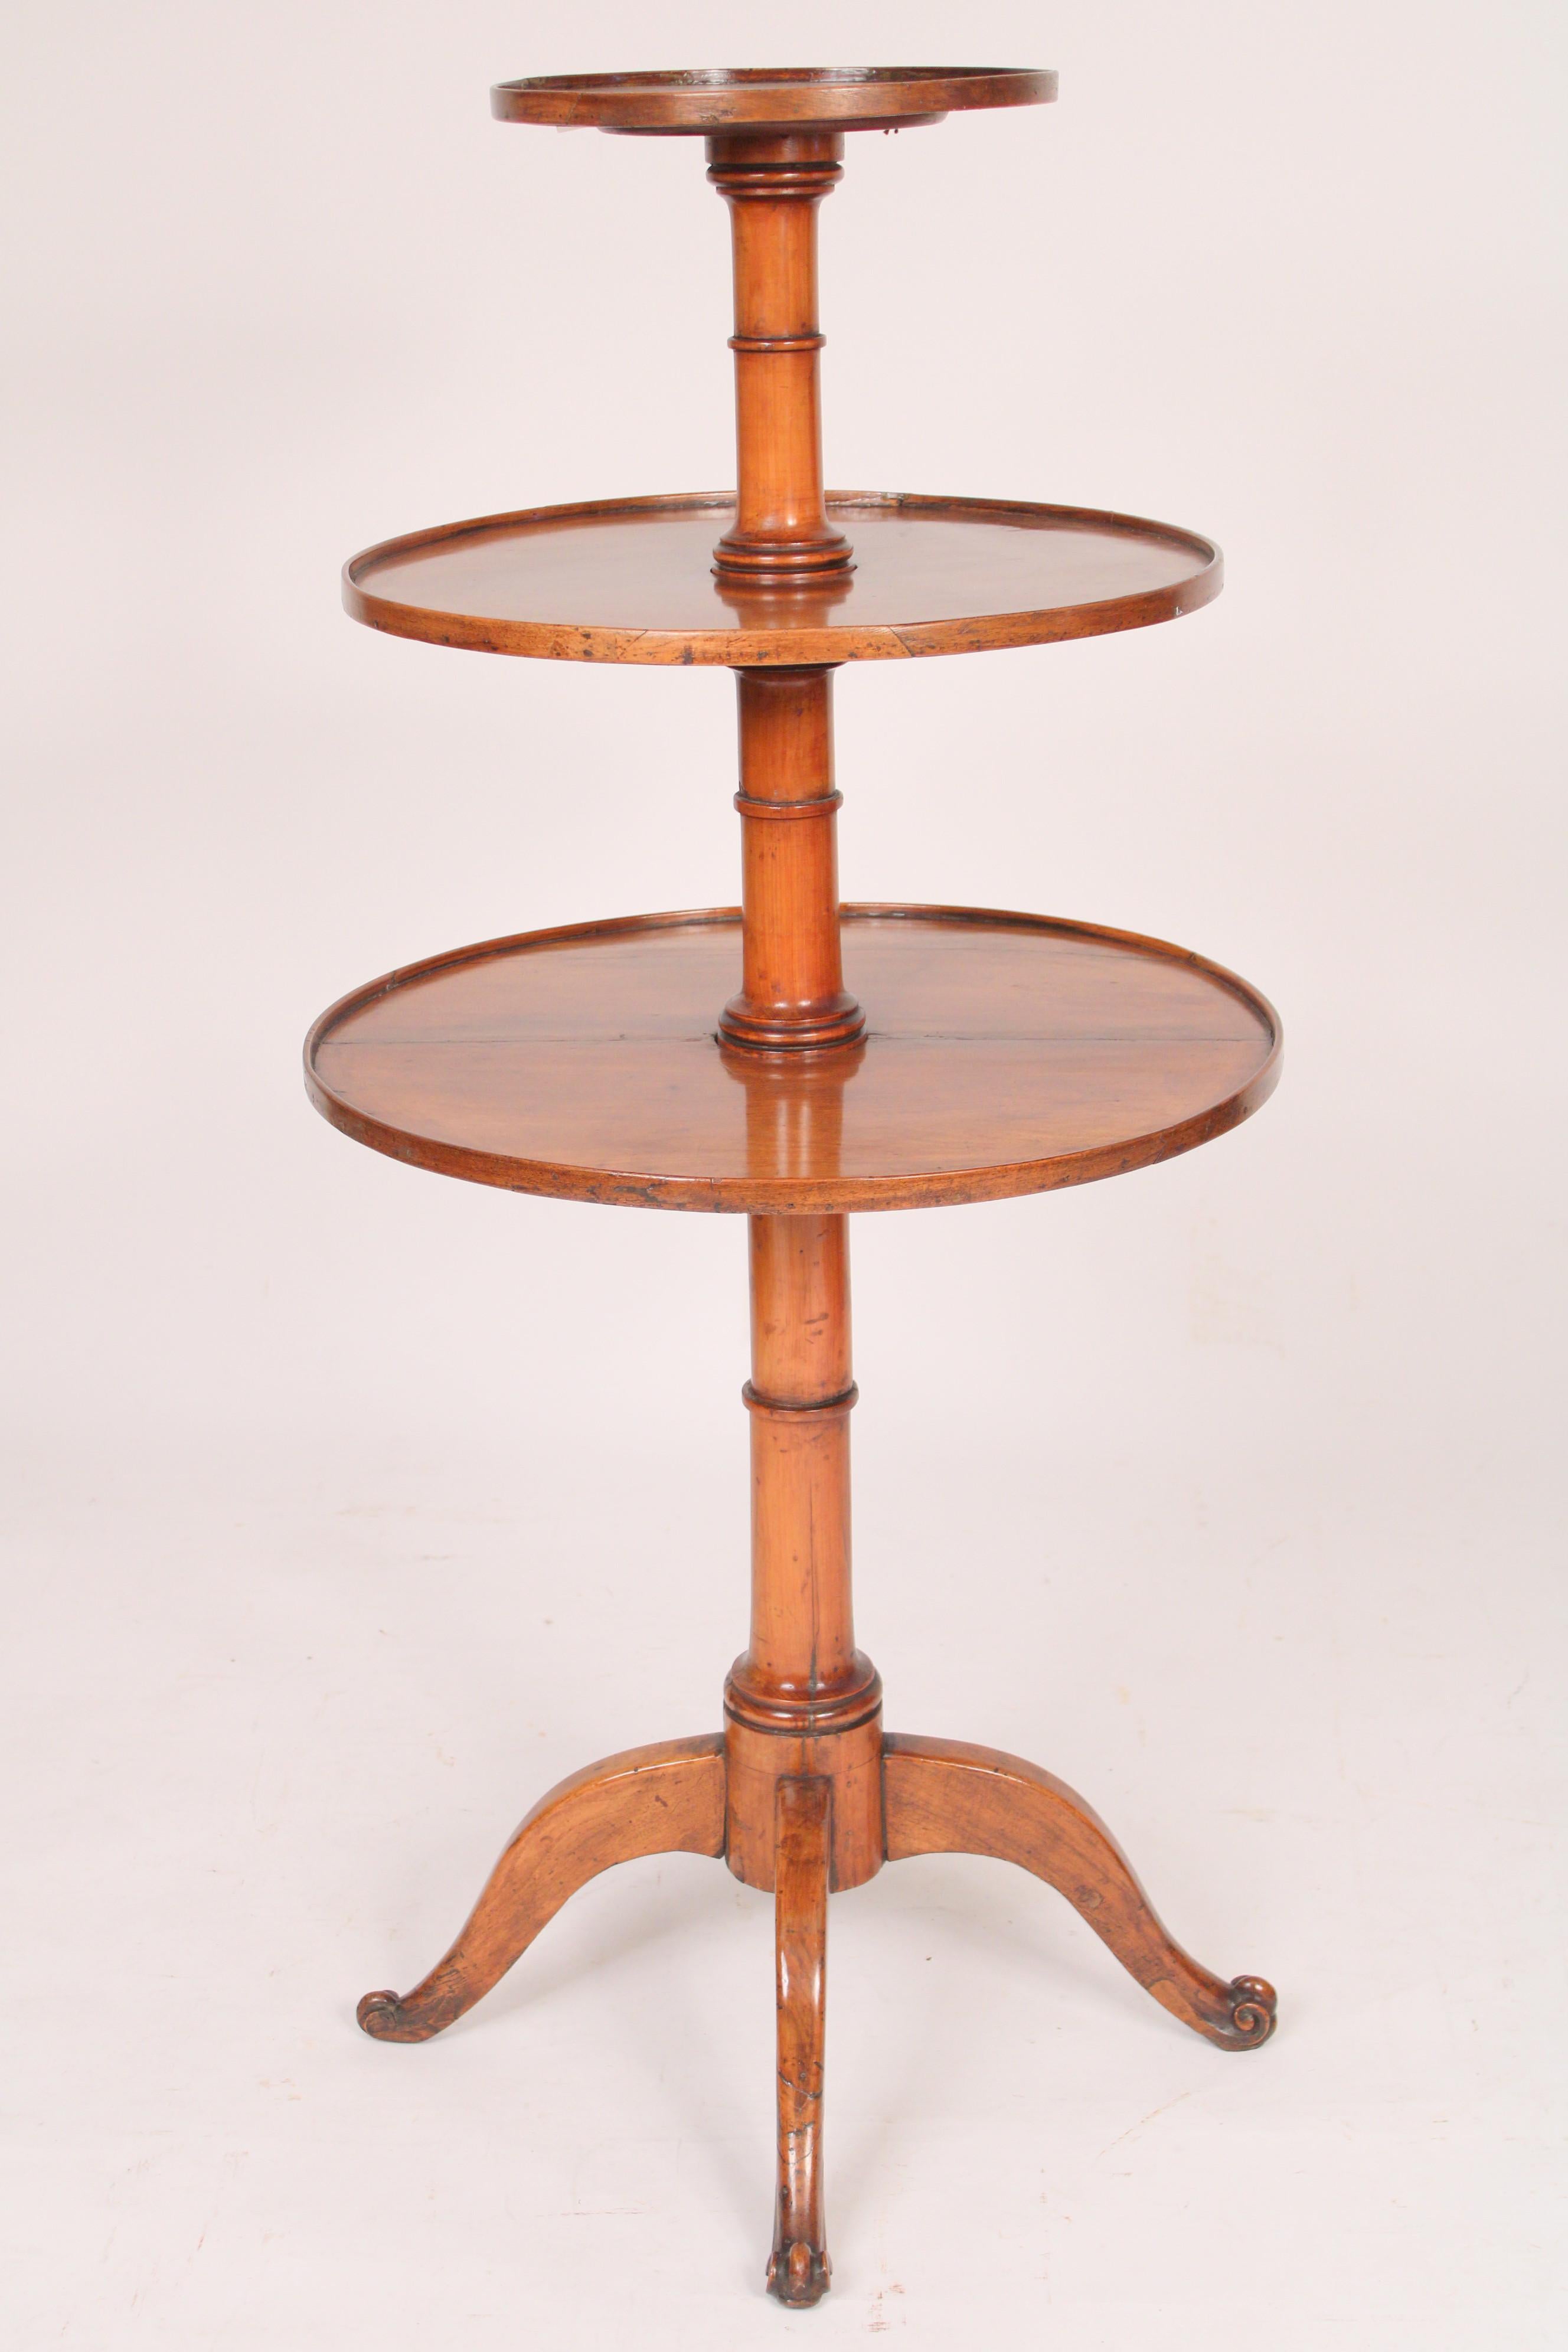 George II mahogany and yew wood 3 tier dumbwaiter, 18th century. With 3 graduated circular mahogany rotating surfaces, yew wood post, 4 mahogany down swept legs ending in fiddle feet. The mahogany retains a lovely fruit wood color.